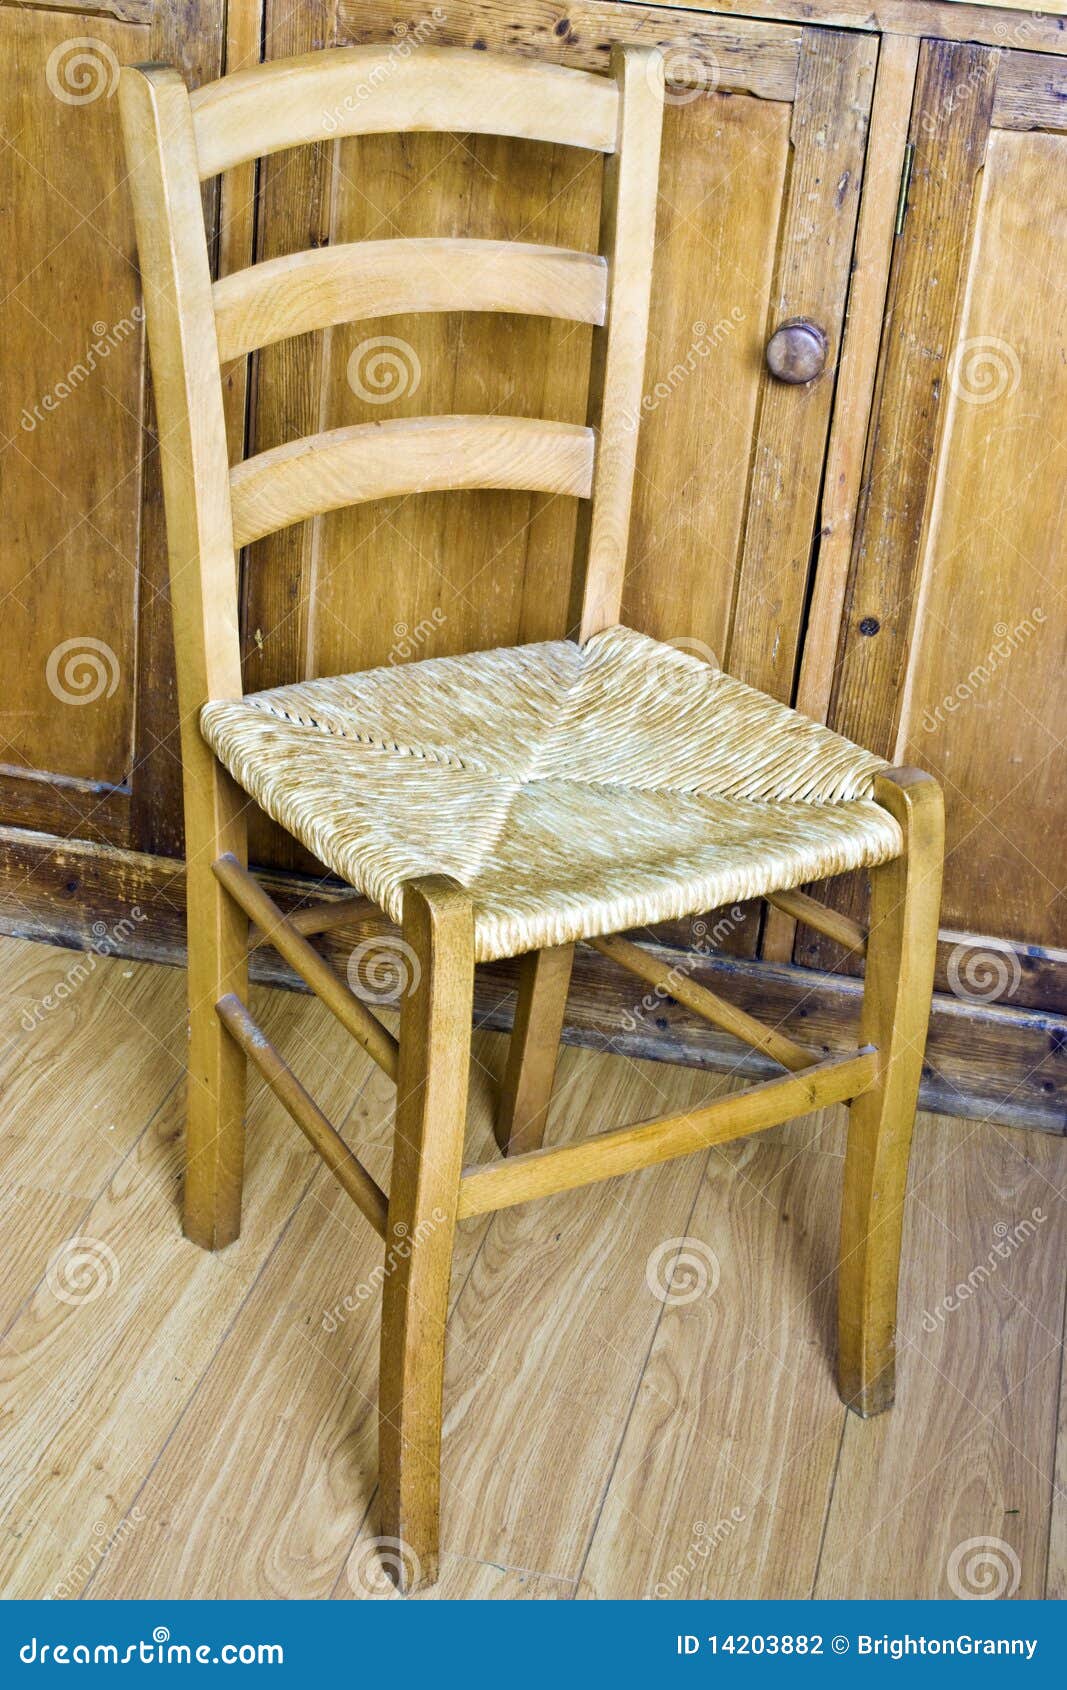 simple wooden and wicker kitchen chair set in s rustic kitchen.